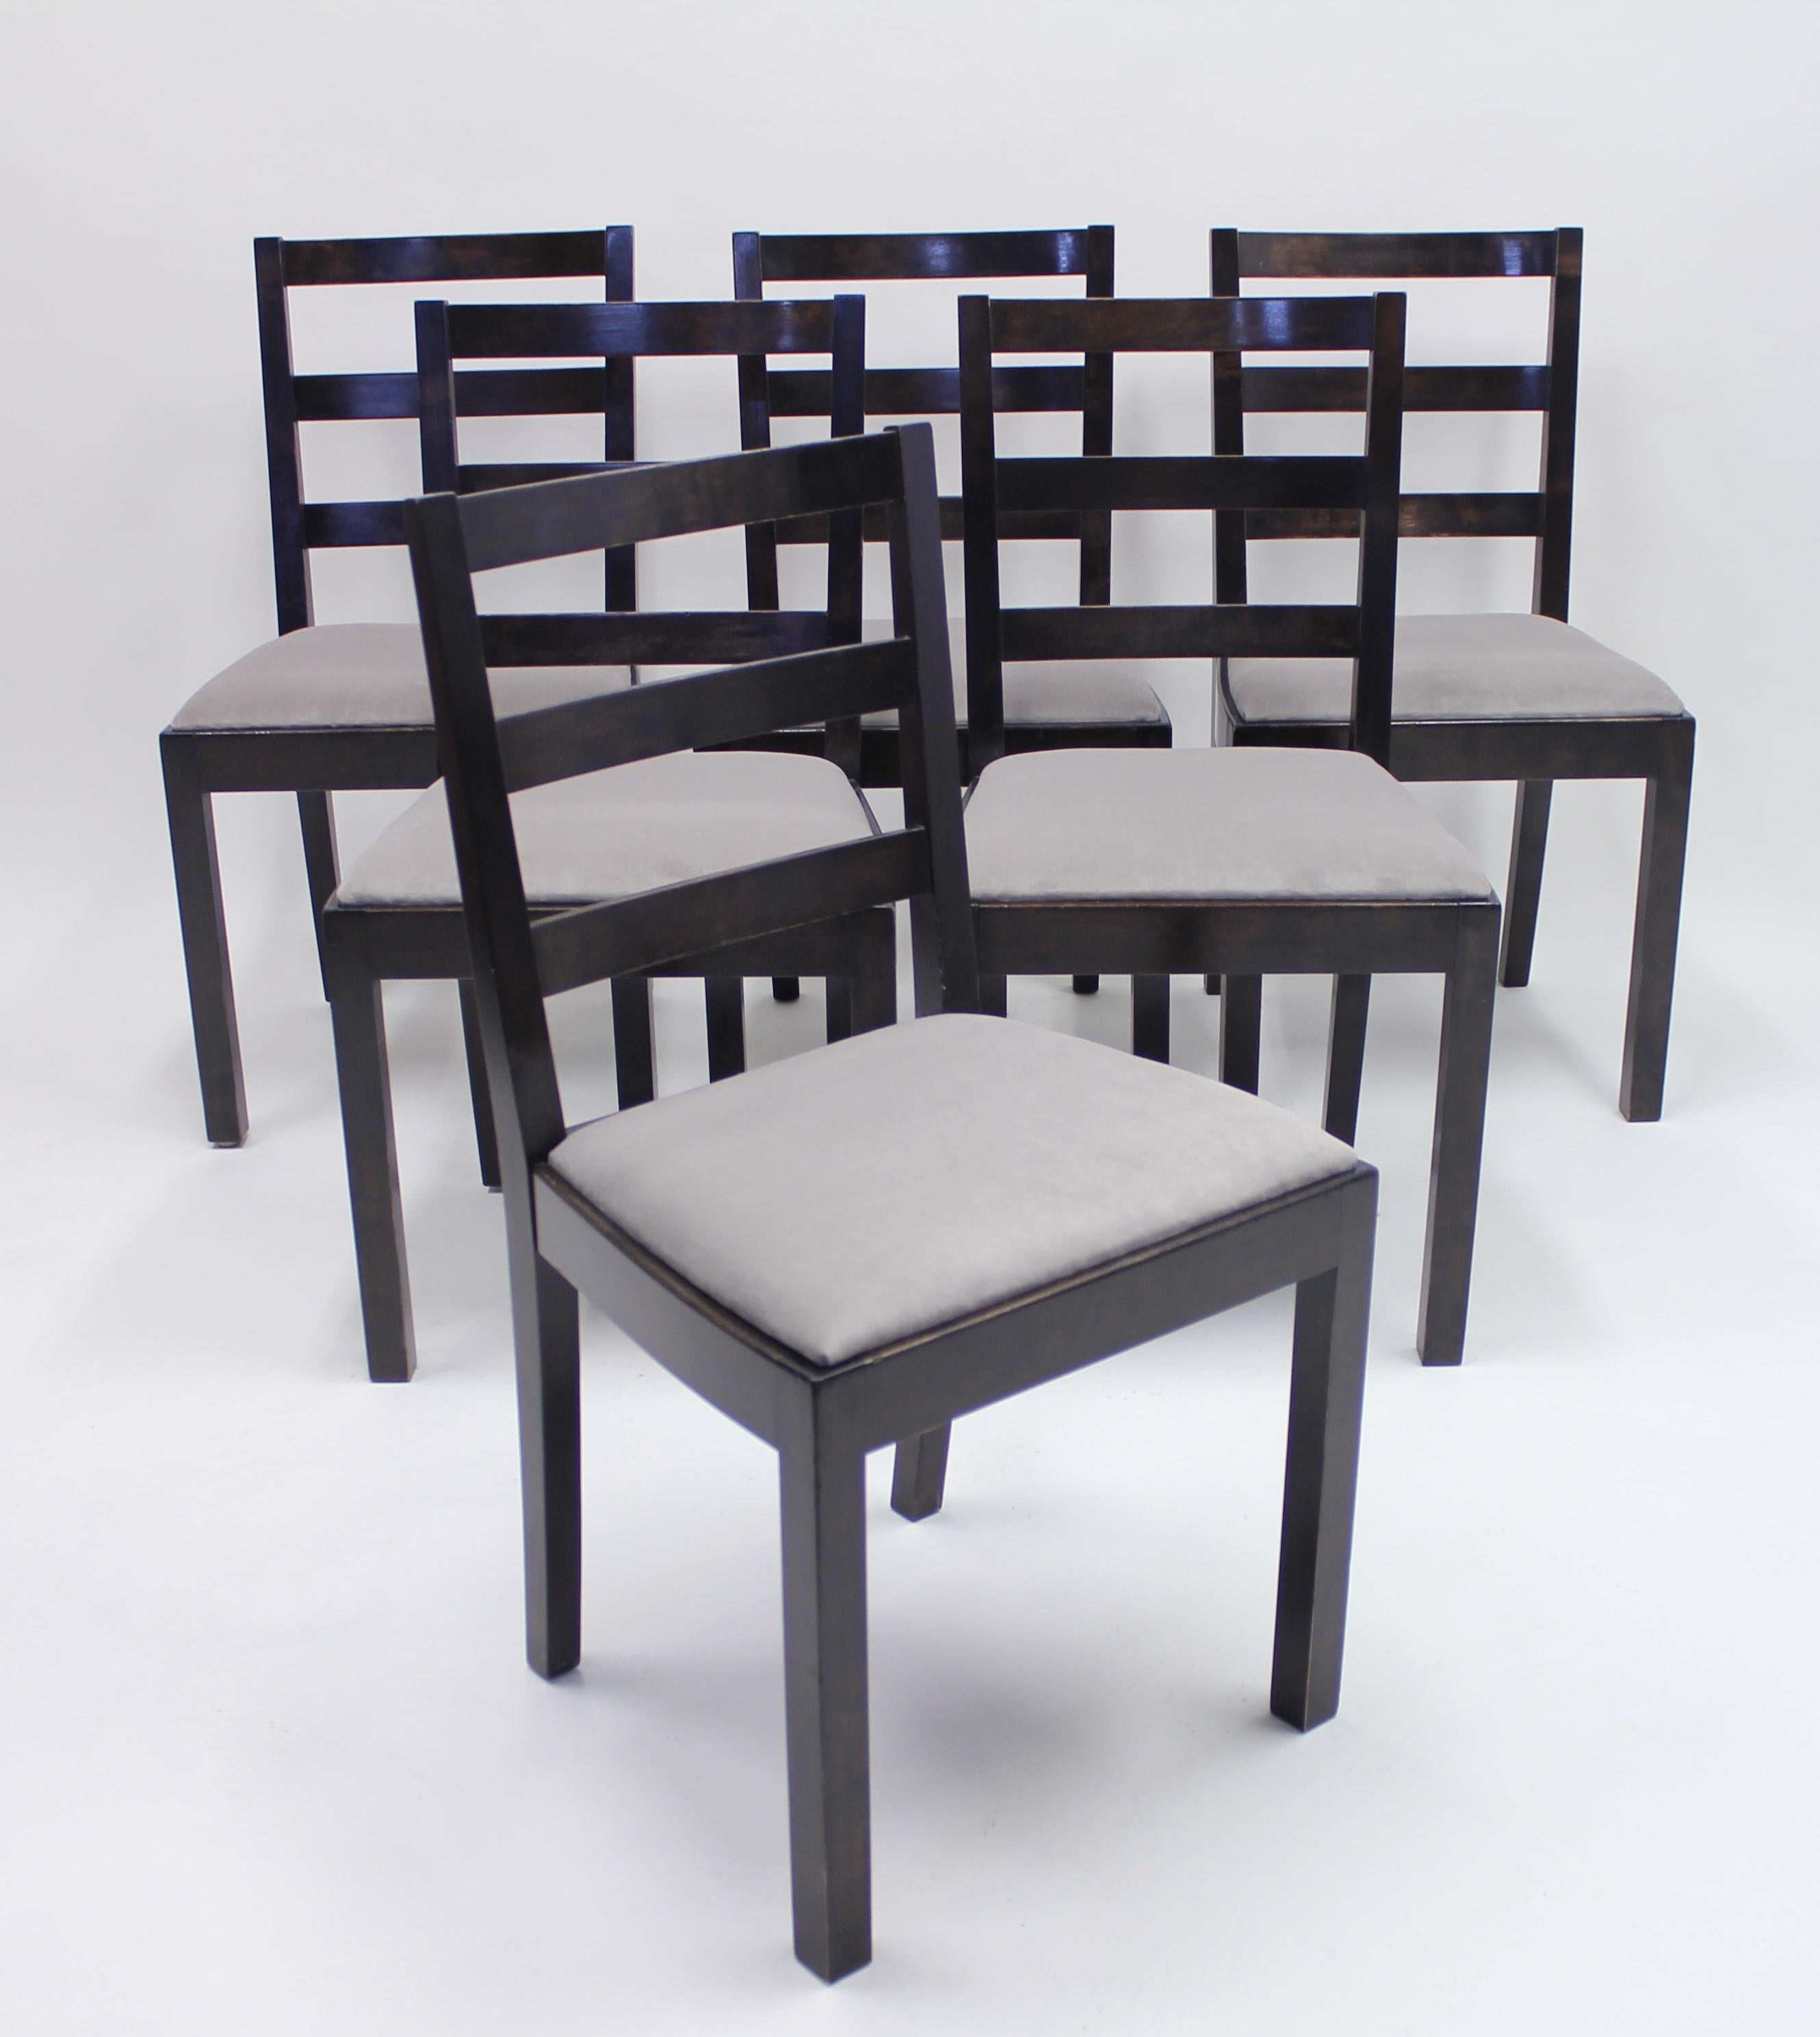 Set of six Typenko chairs designed by Axel Einar Hjorth in 1931 for Nordiska Kompaniet. Frame of dark stained birch with new light grey velvet upholstery. All of the chairs have the original metal plack from the manufacturer. The present model is